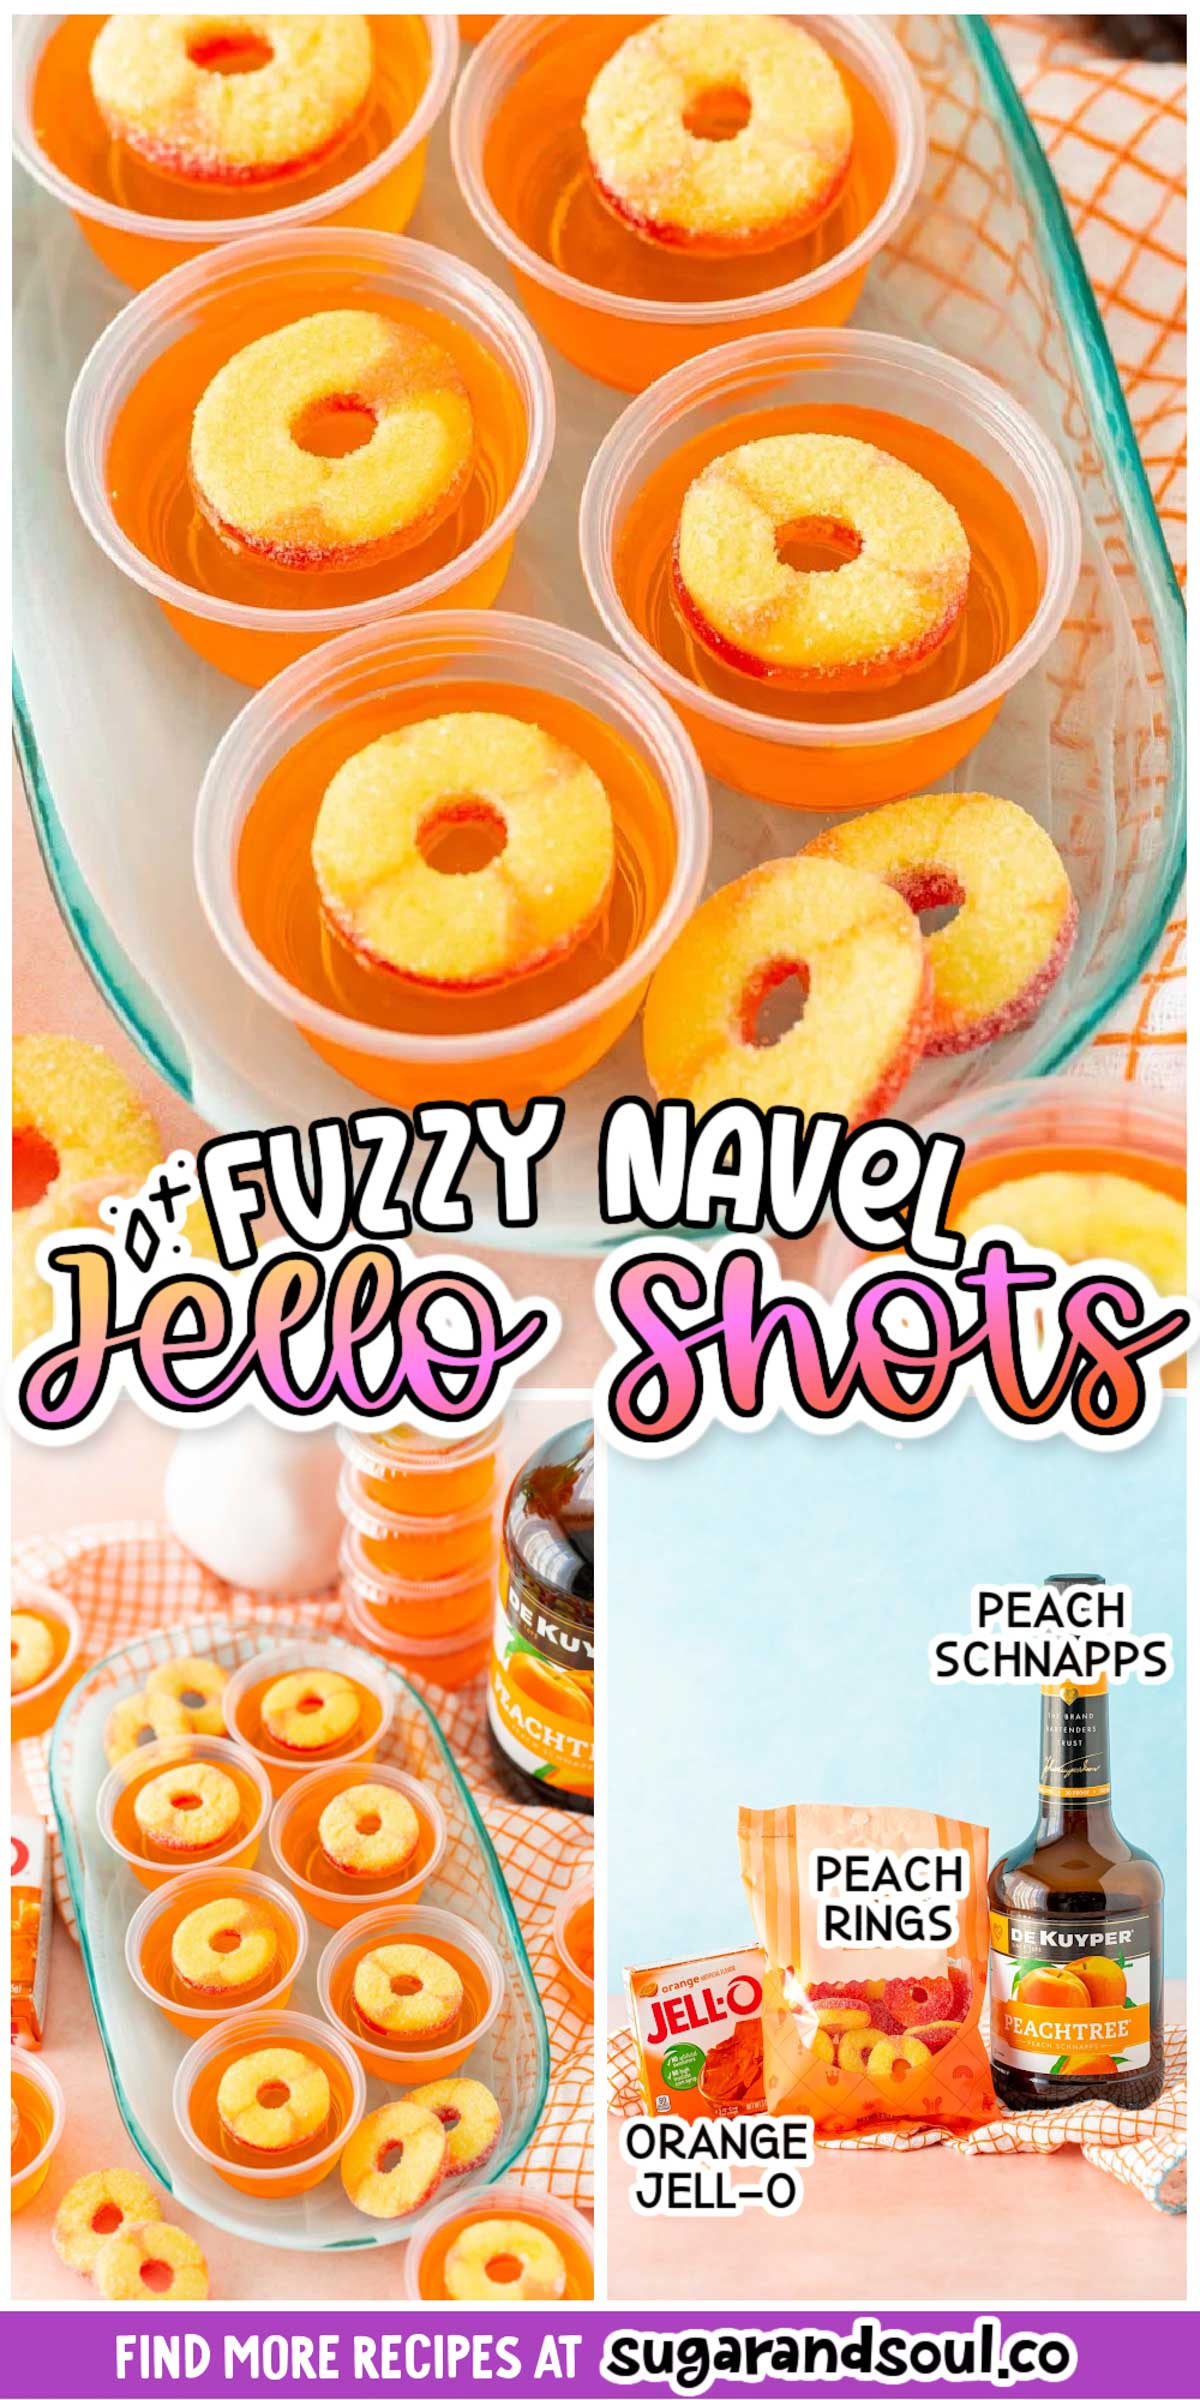 Fuzzy Navel Jello Shots are a fruity, sweet way to enjoy the popular cocktail in Jell-O form, making it the perfect boozy treat to share! Requires less than 10 minutes of hands-on time to prepare a dozen shots! via @sugarandsoulco